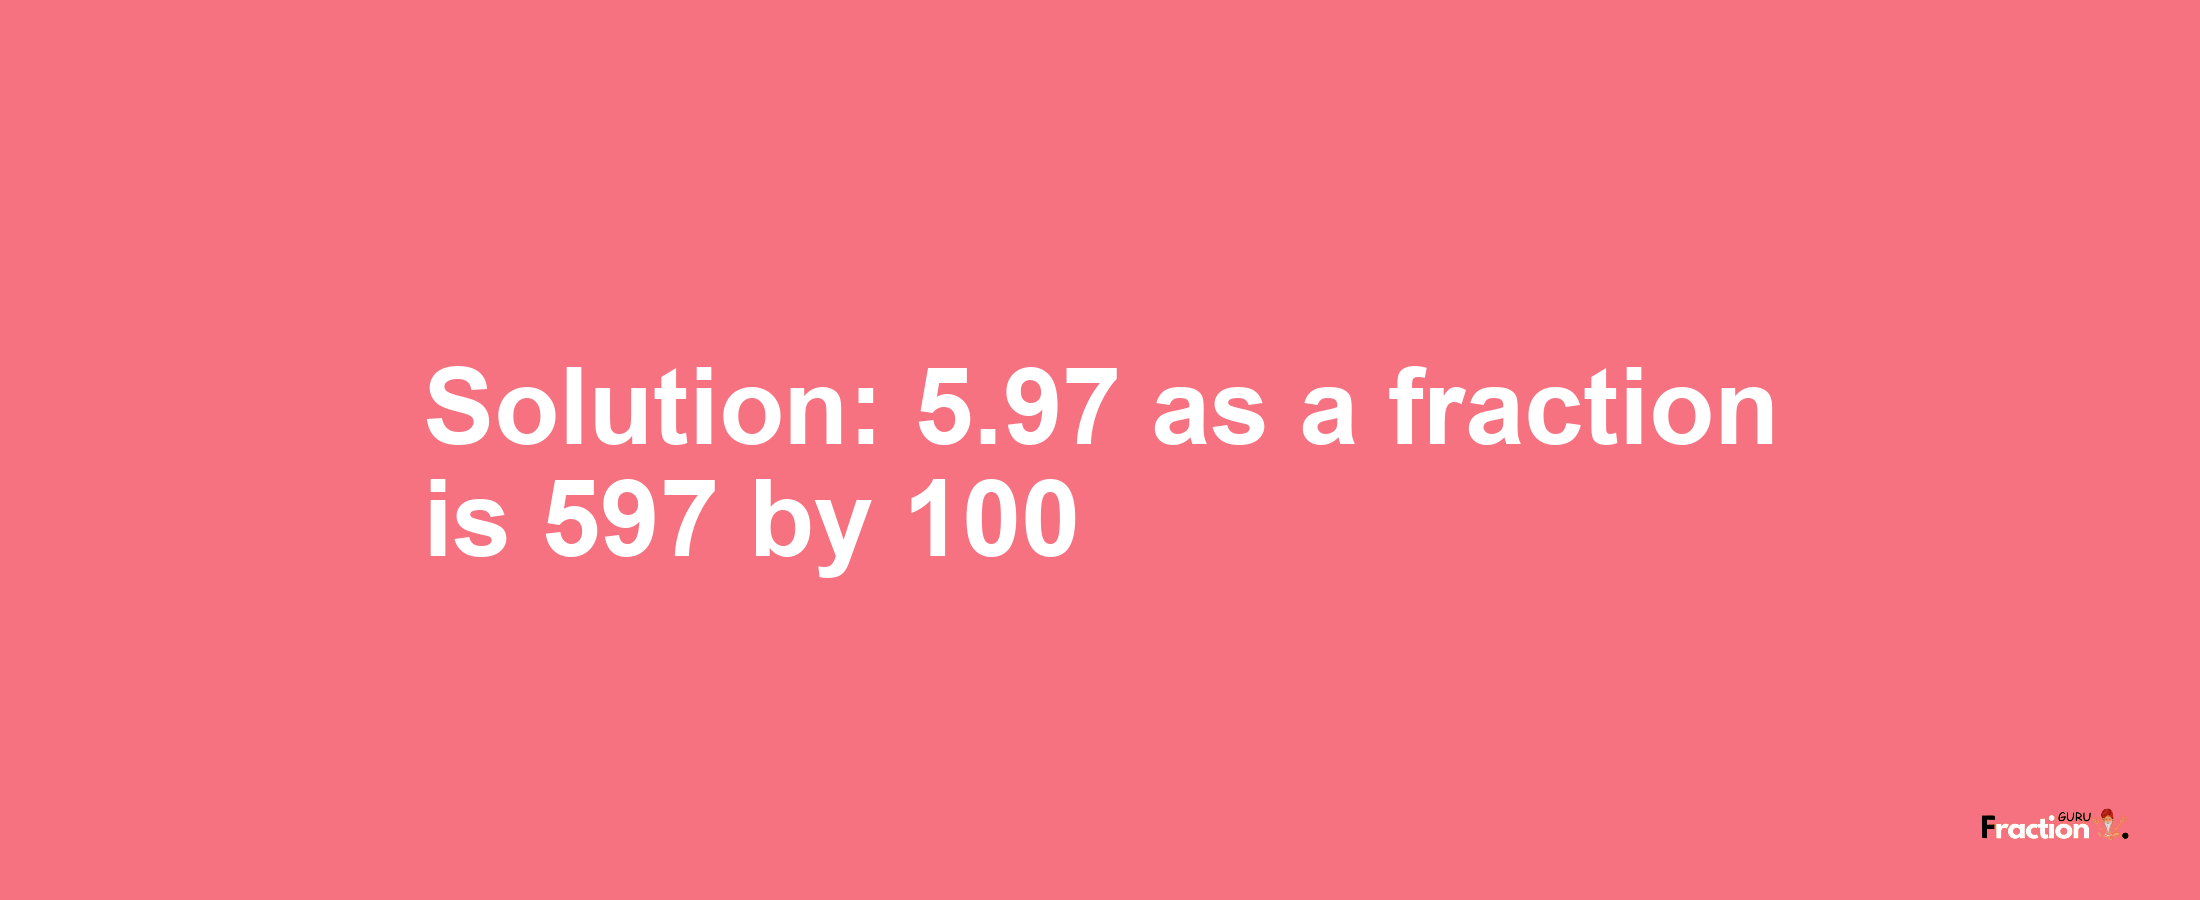 Solution:5.97 as a fraction is 597/100